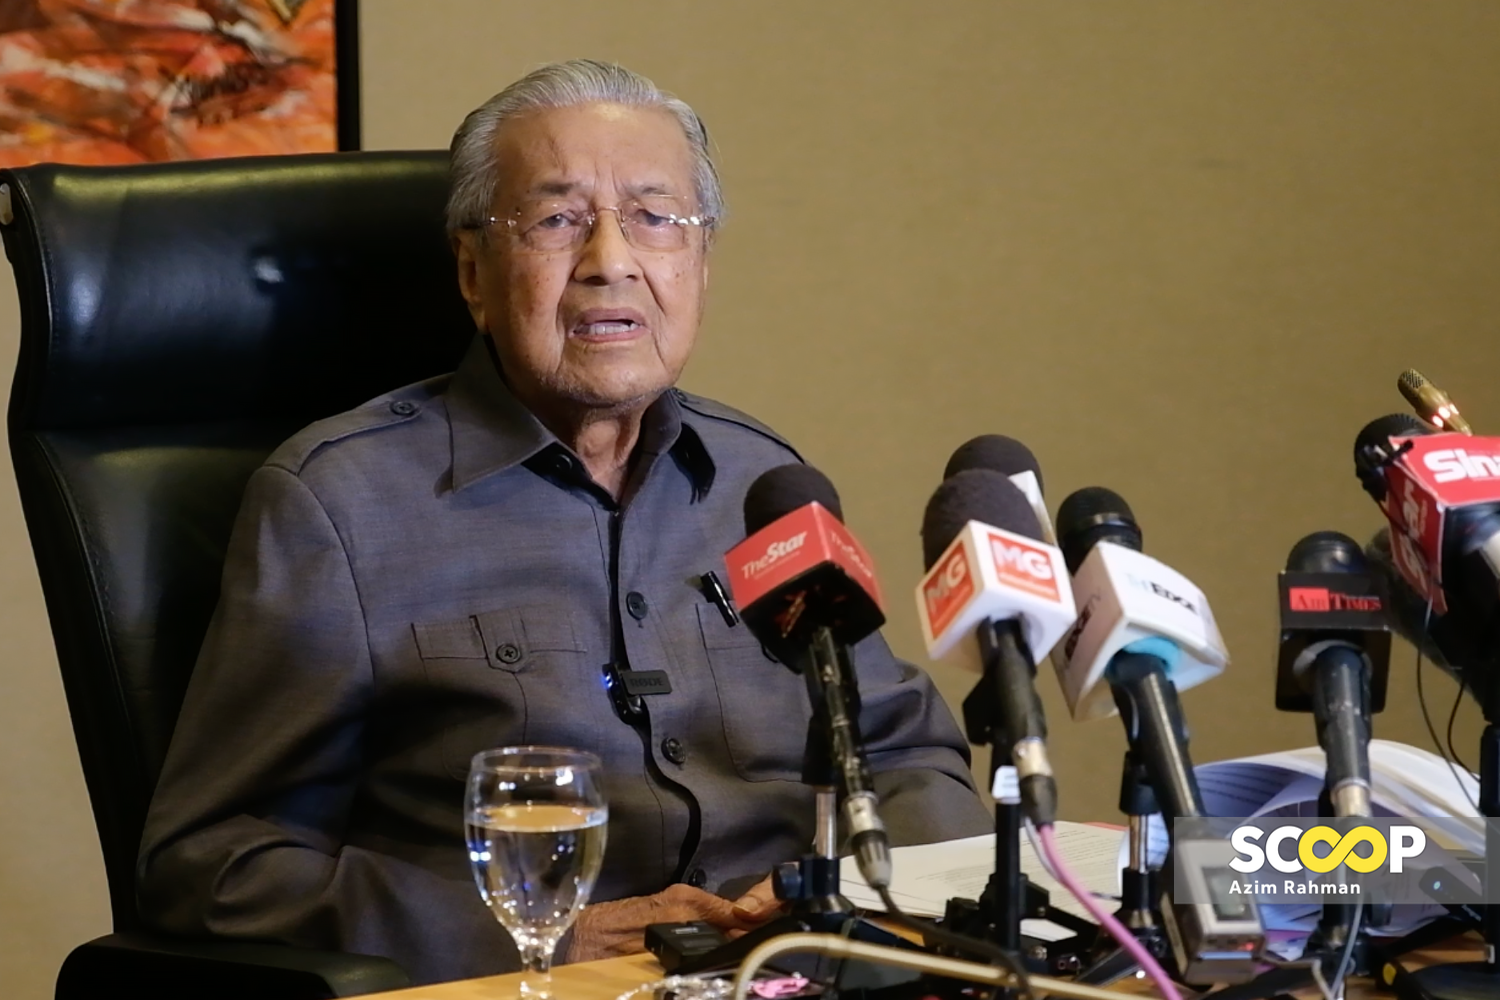 Cops to quiz Dr Mahathir over remarks on 'disloyalty' of non-Malays tomorrow morning